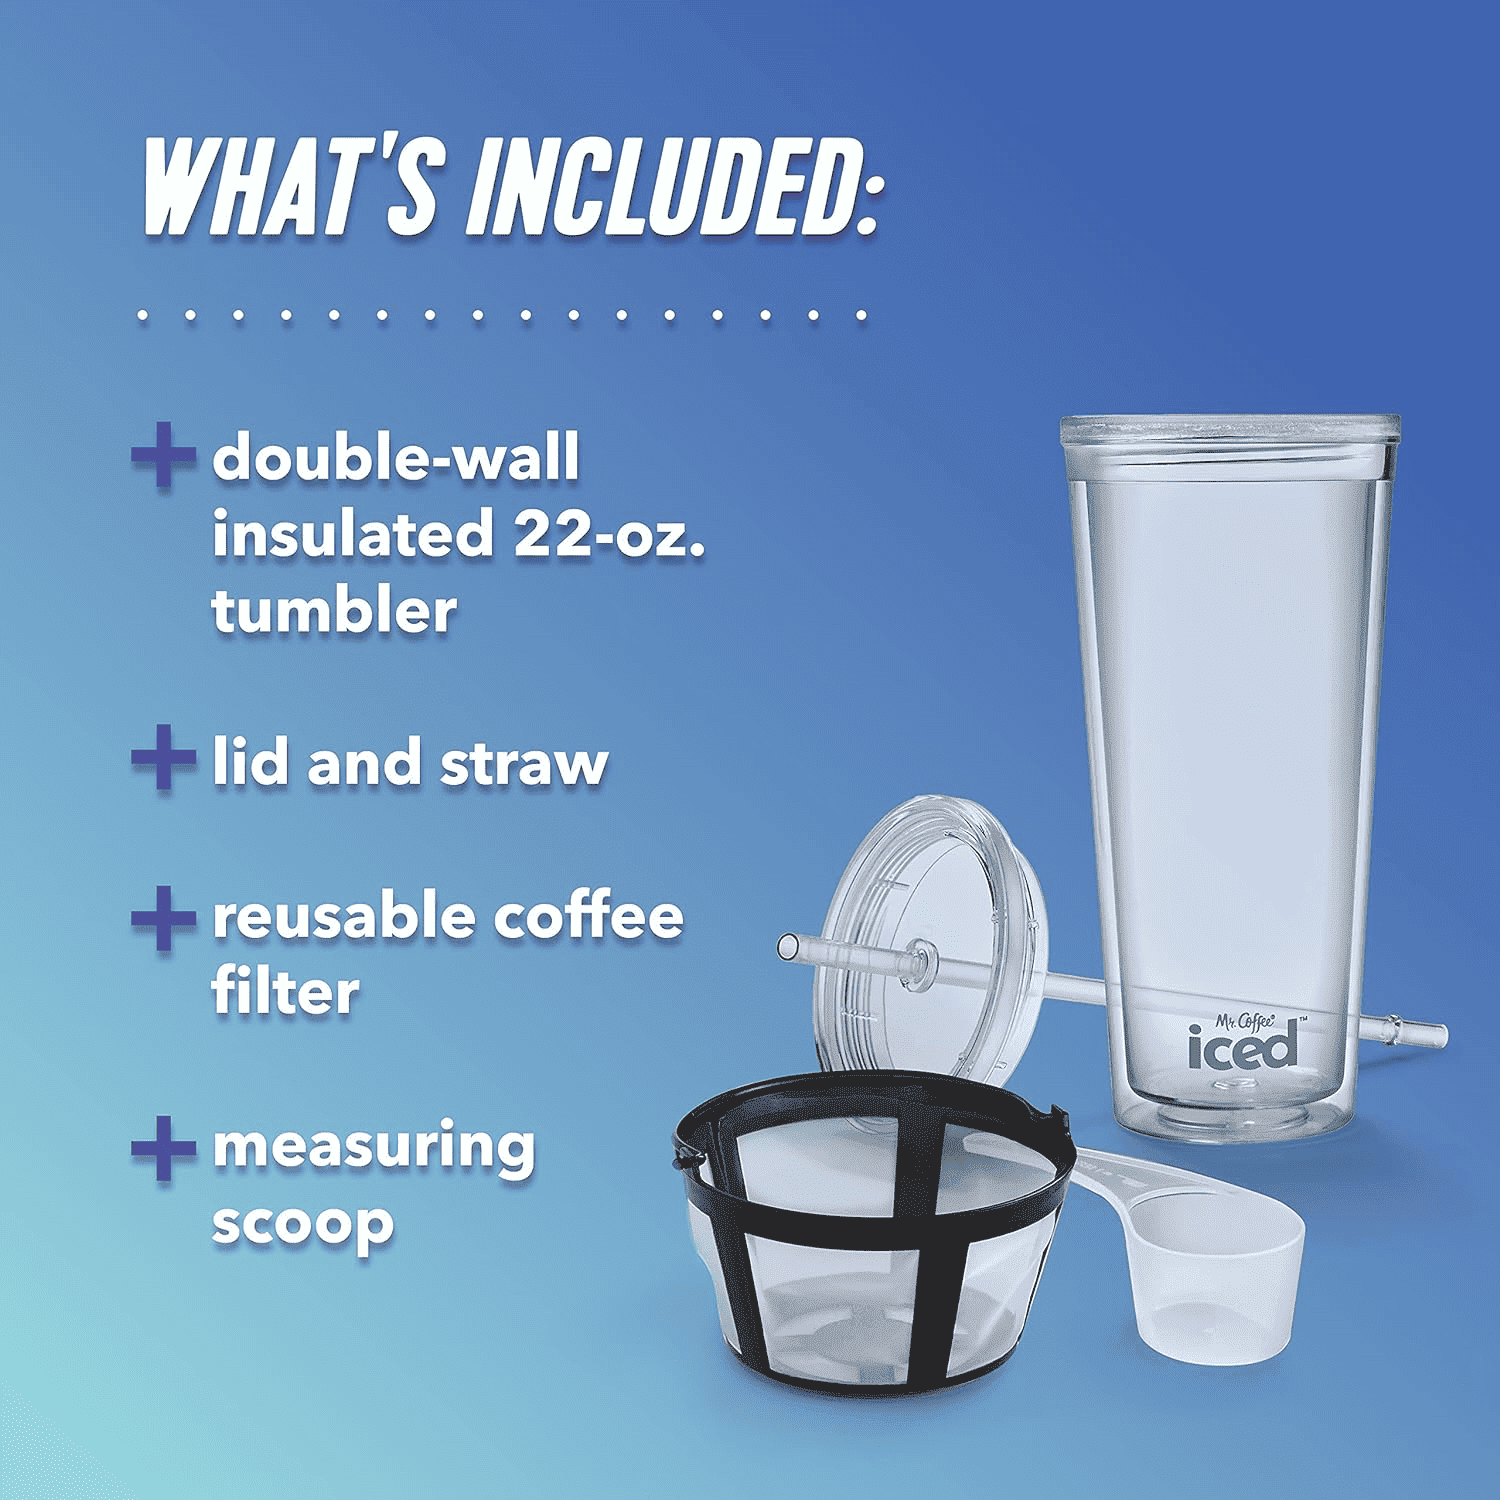 Mr. Coffee Iced Coffee Maker, coffee maker with reusable tumbler, hot coffee maker, tumbler and coffee filter